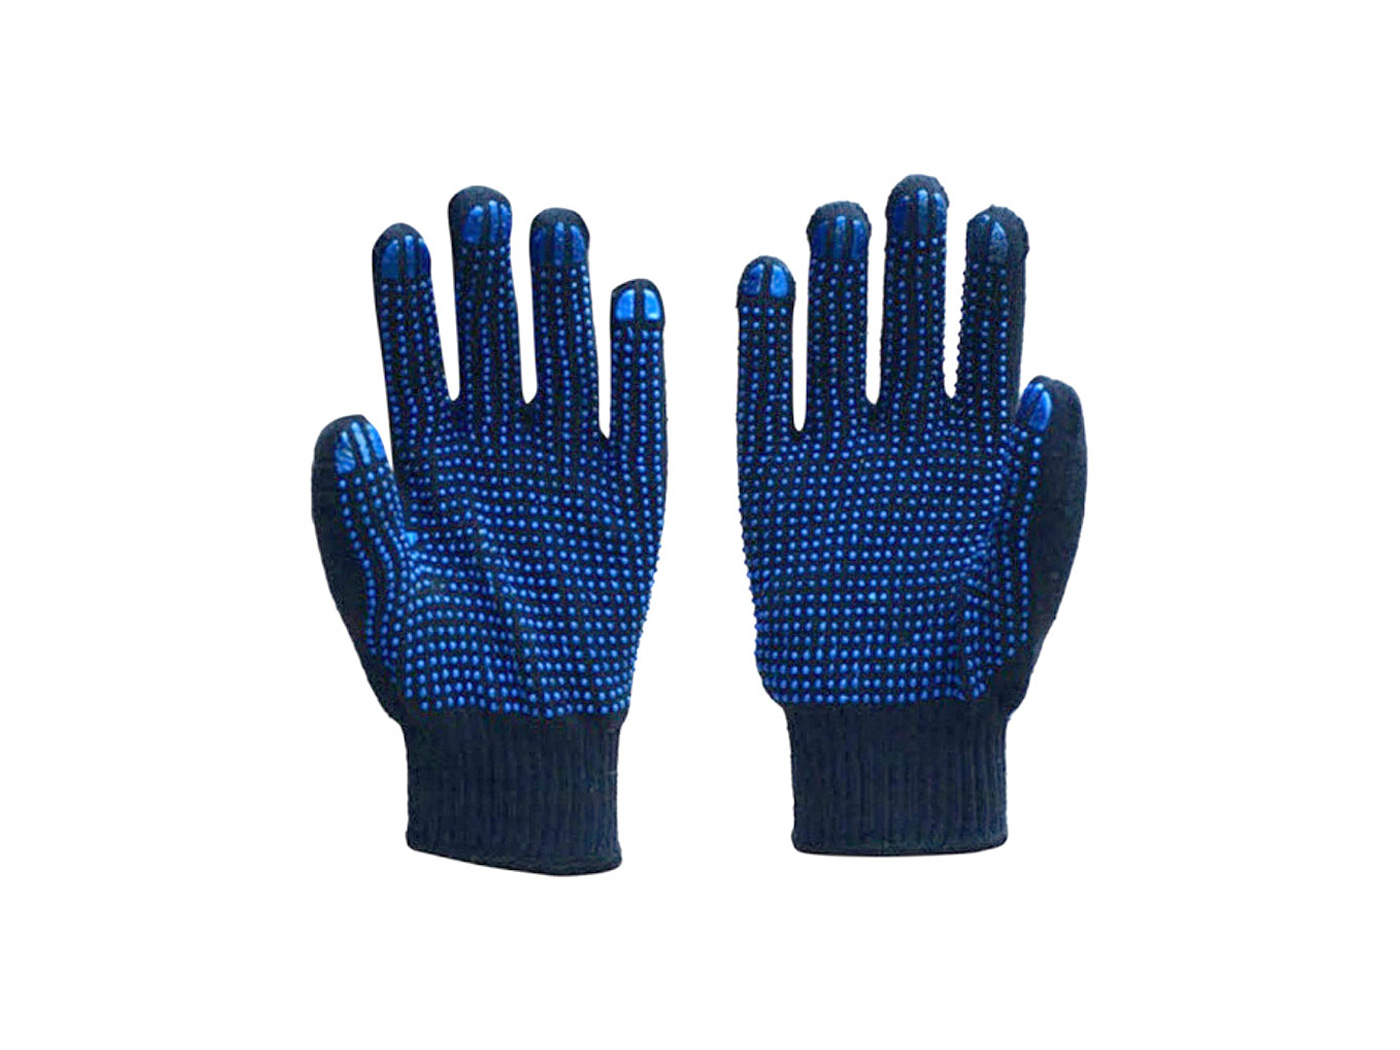 Knitted Gloves Supplier in Abu dhabi